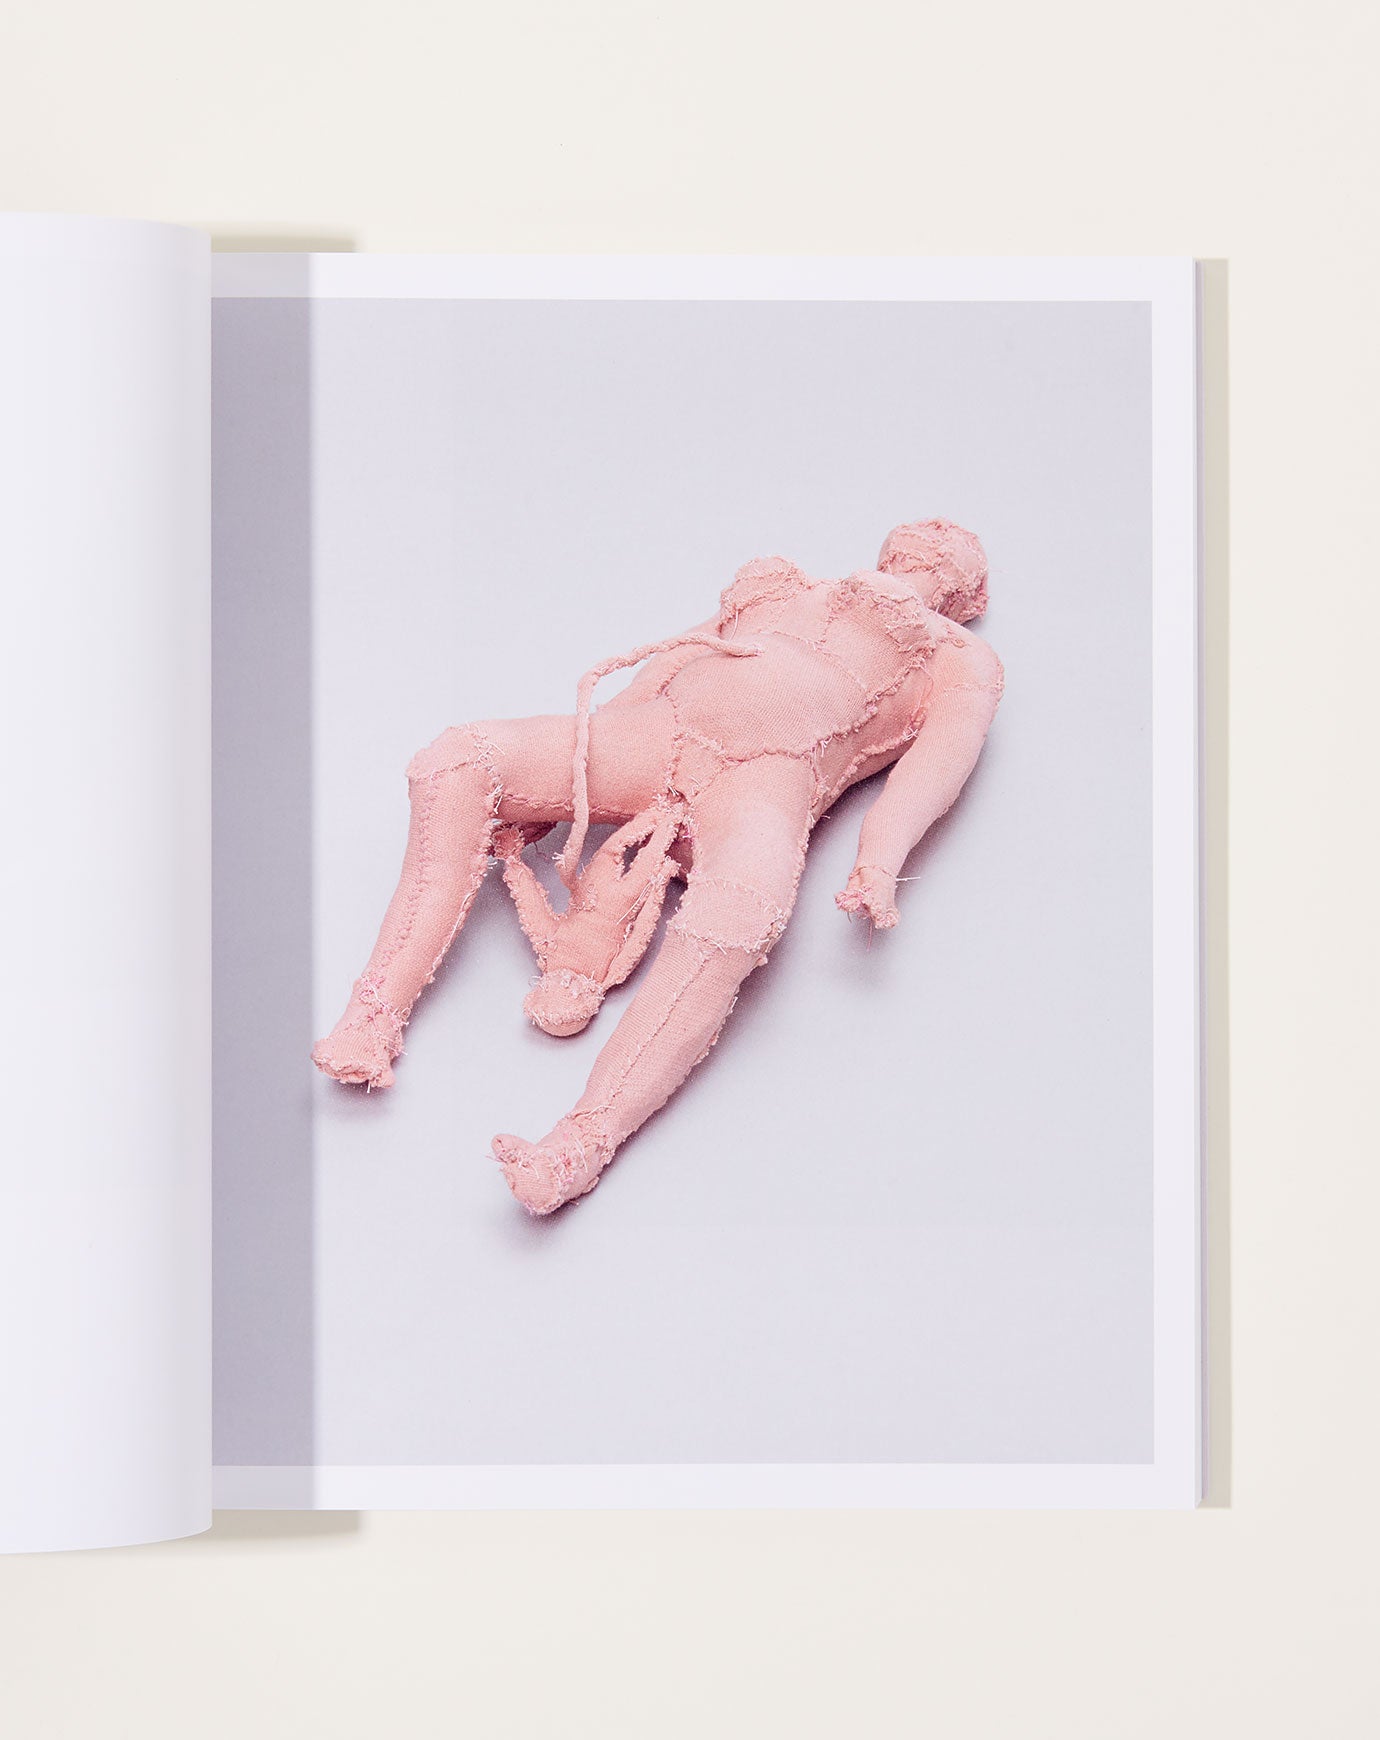 Artbook Louise Bourgeois: The Woven Child